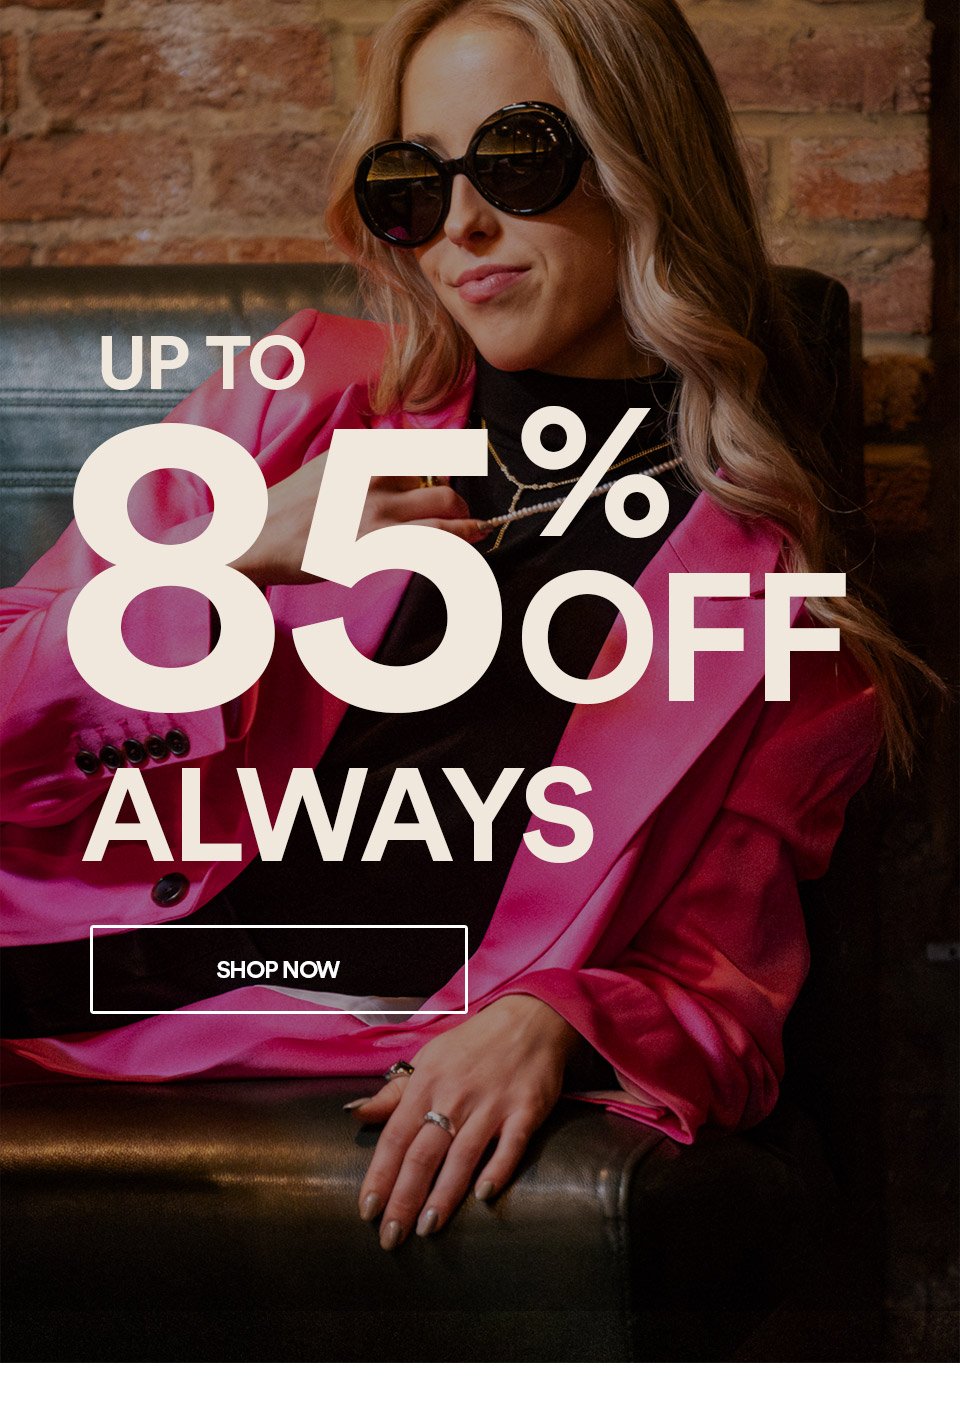 UP TO 85% OFF, ALWAYS - SHOP NOW >